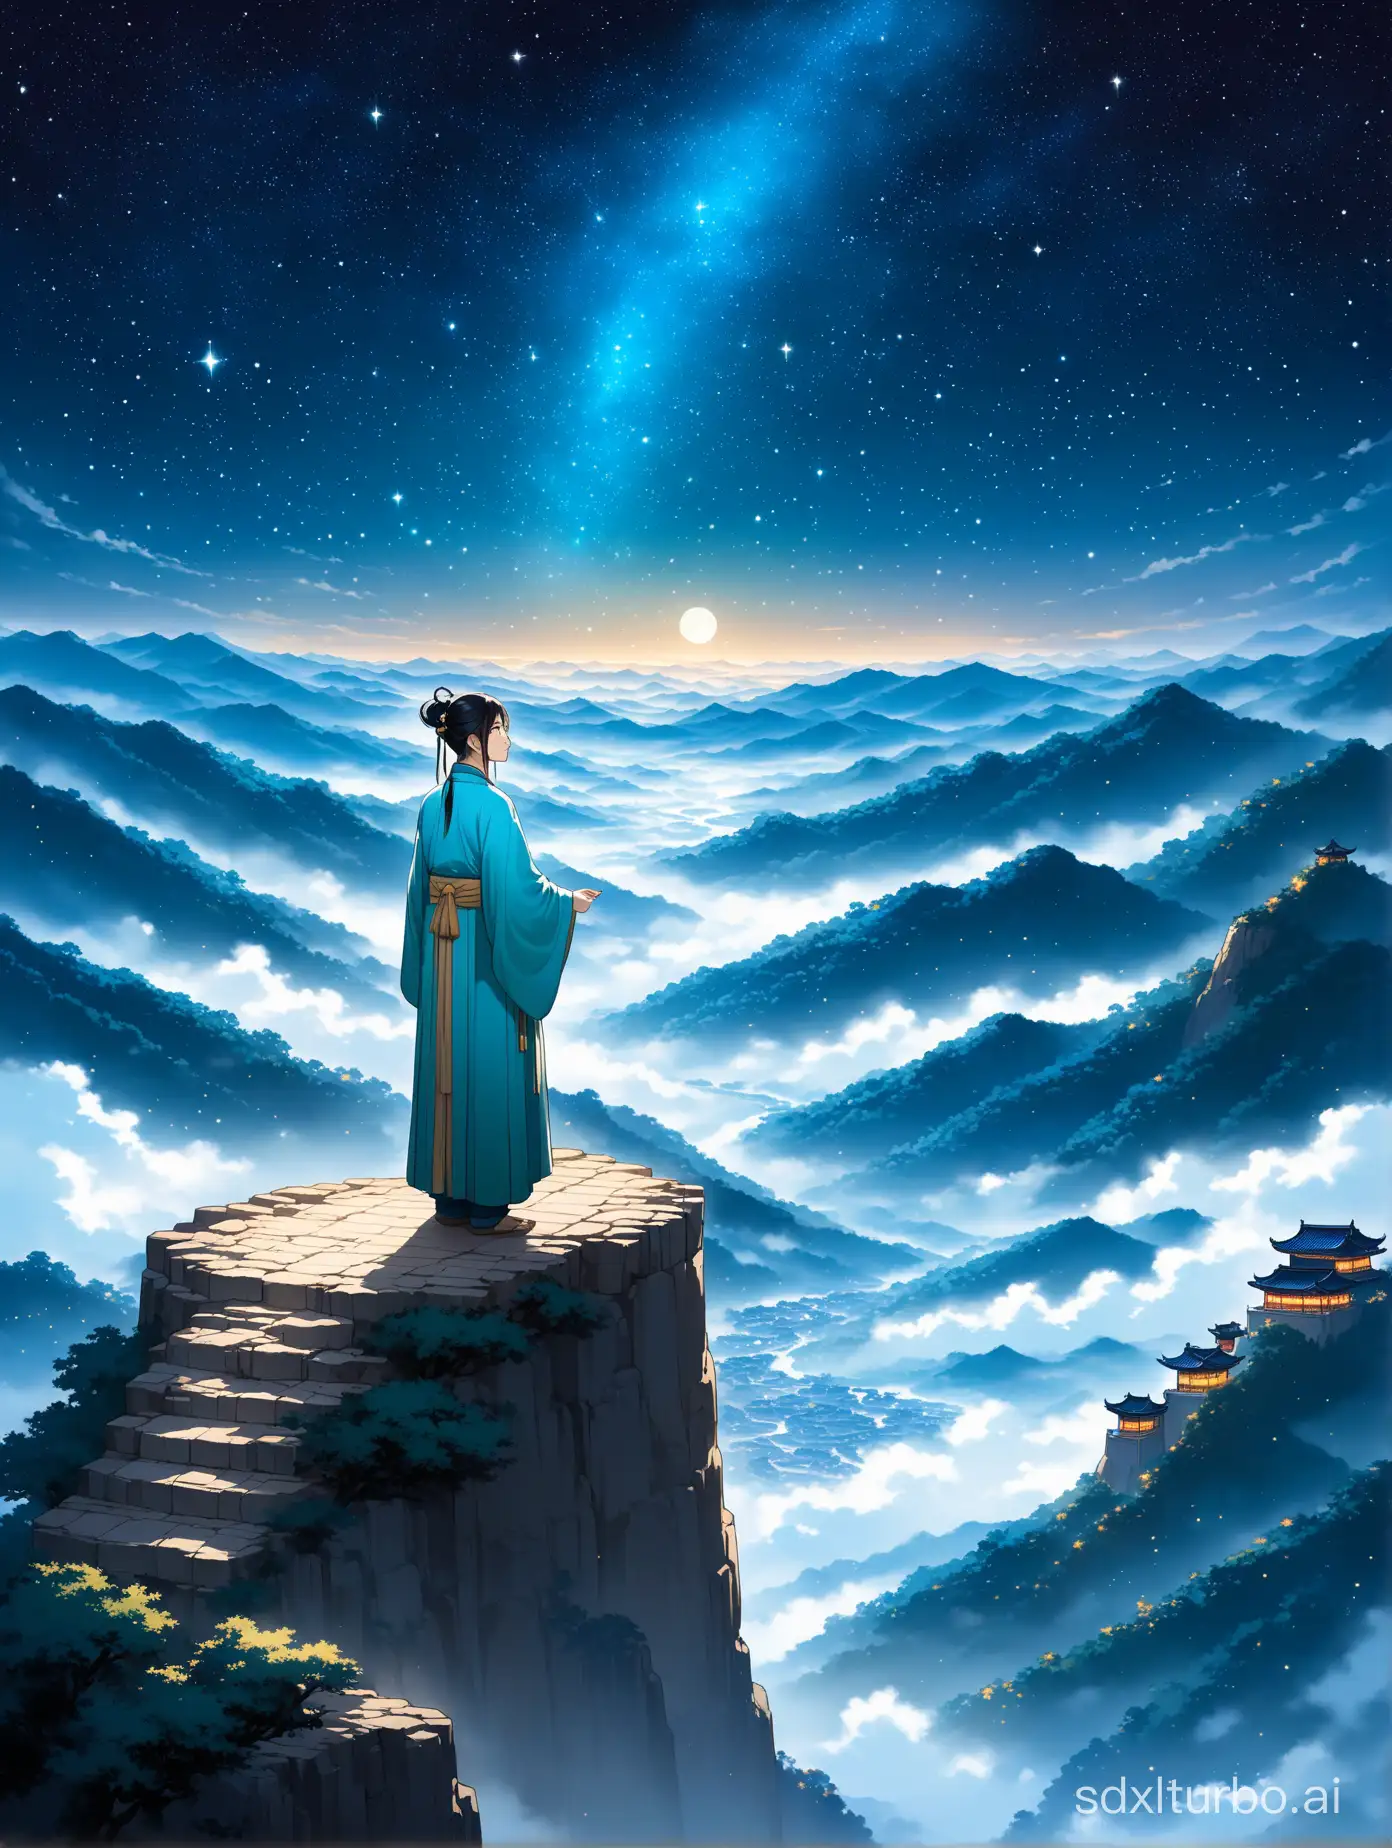 Ancient-Chinese-Scholar-Contemplating-Celestial-Palace-Under-Starry-Sky